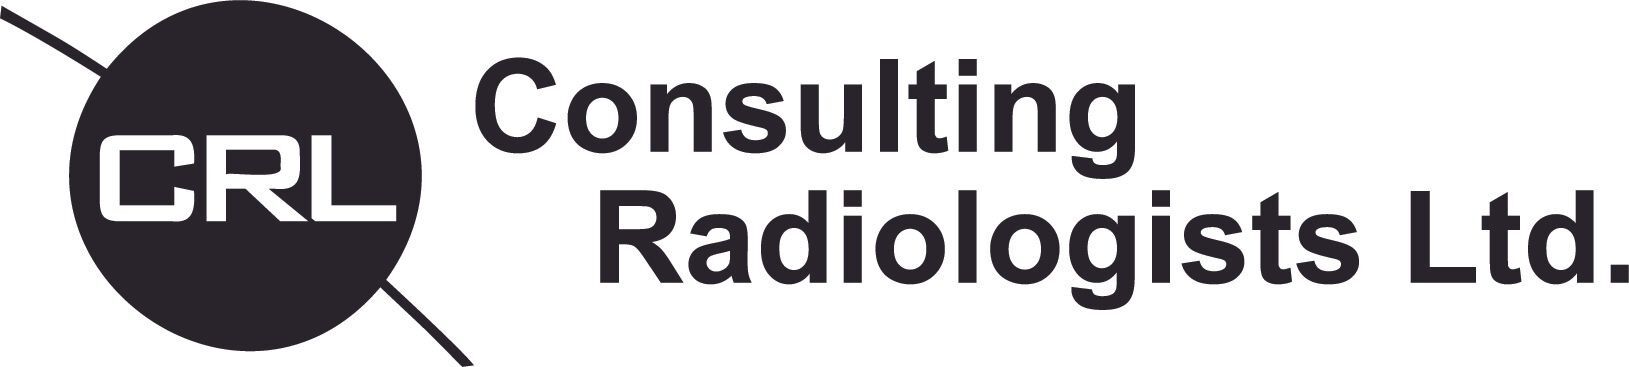 Consulting Radiologists Ltd.